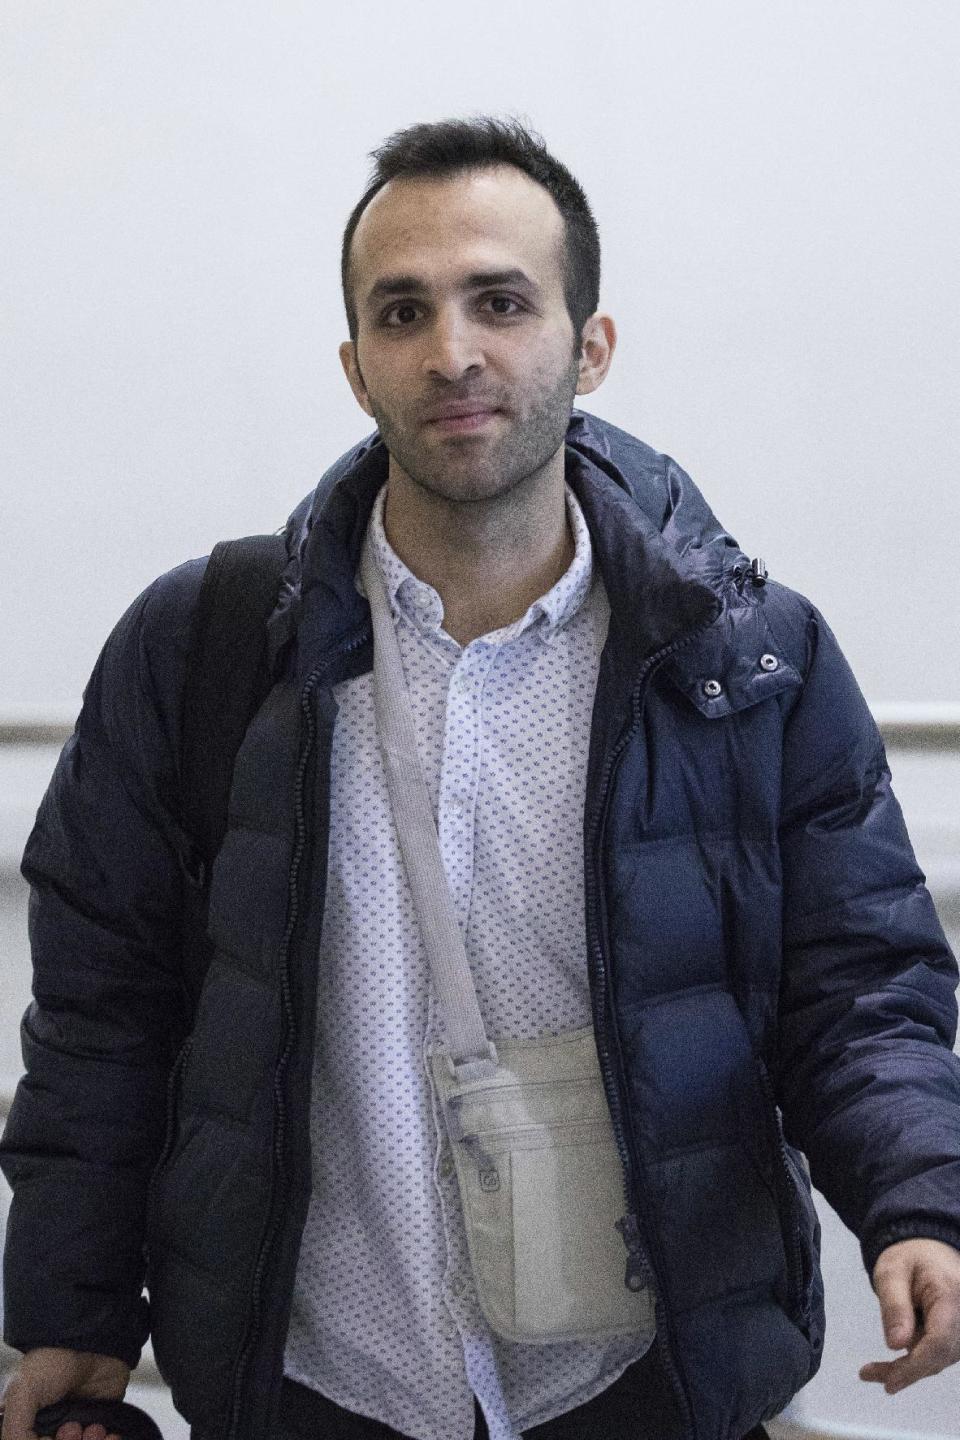 Iranian bioengineering researcher Nima Enayati walks out of a gate after arriving at John F. Kennedy International Airport in New York, Sunday, Feb. 5, 2017. The Ph.D. candidate at a university in Milan was prevented from boarding a flight to the U.S. on Jan. 30. He had a visa to conduct research on robotic surgery at Stanford University in California. (AP Photo/Alexander F. Yuan)